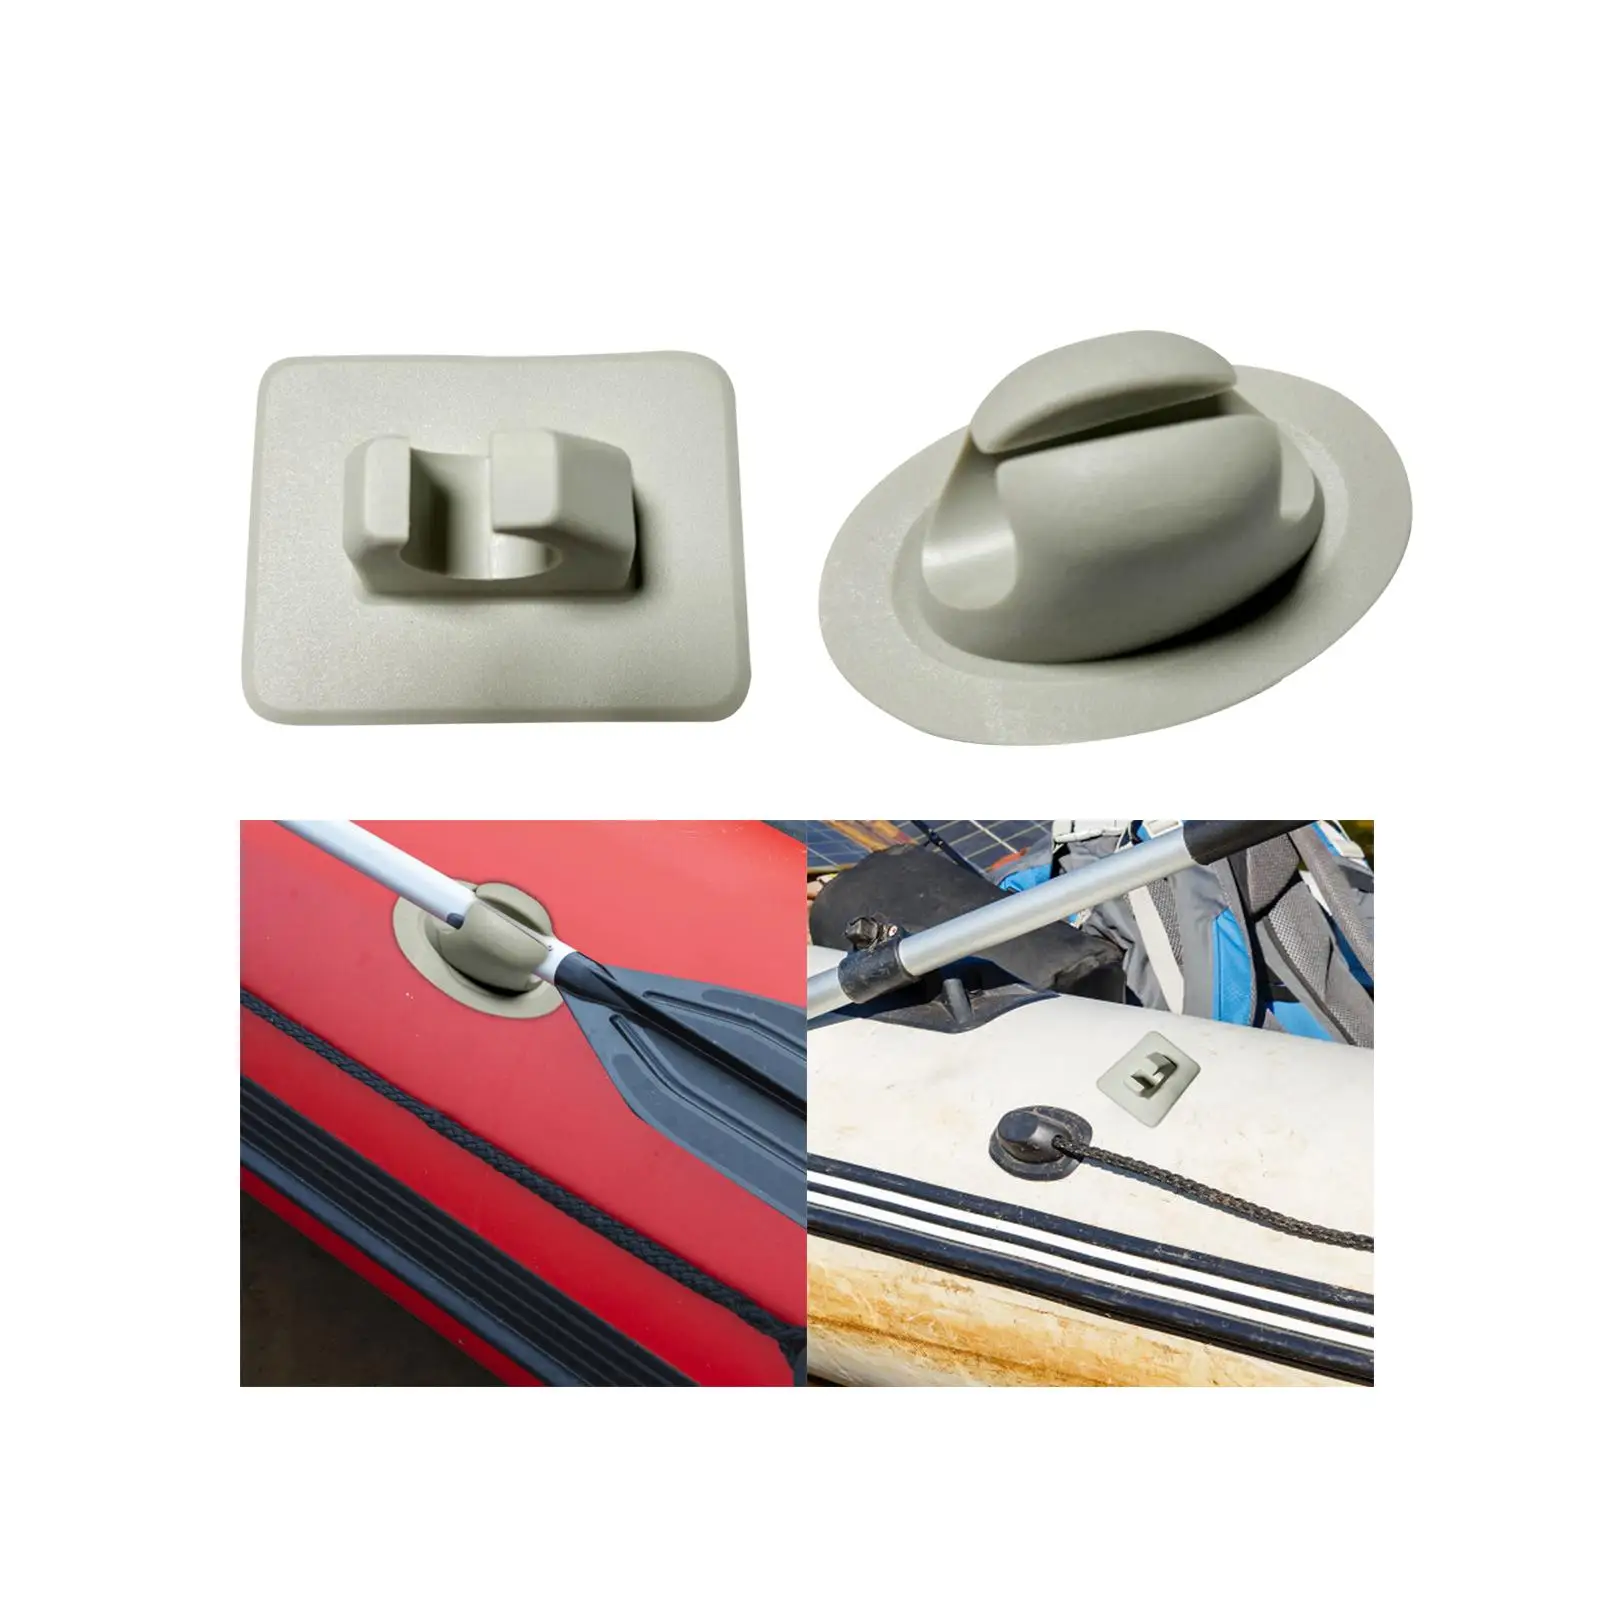 Kayak Paddle Holder Quick and Easy Mounting Deck Mounted Boat Paddle Holder Clips for Marine Boat Surfboard Canoes Accessories